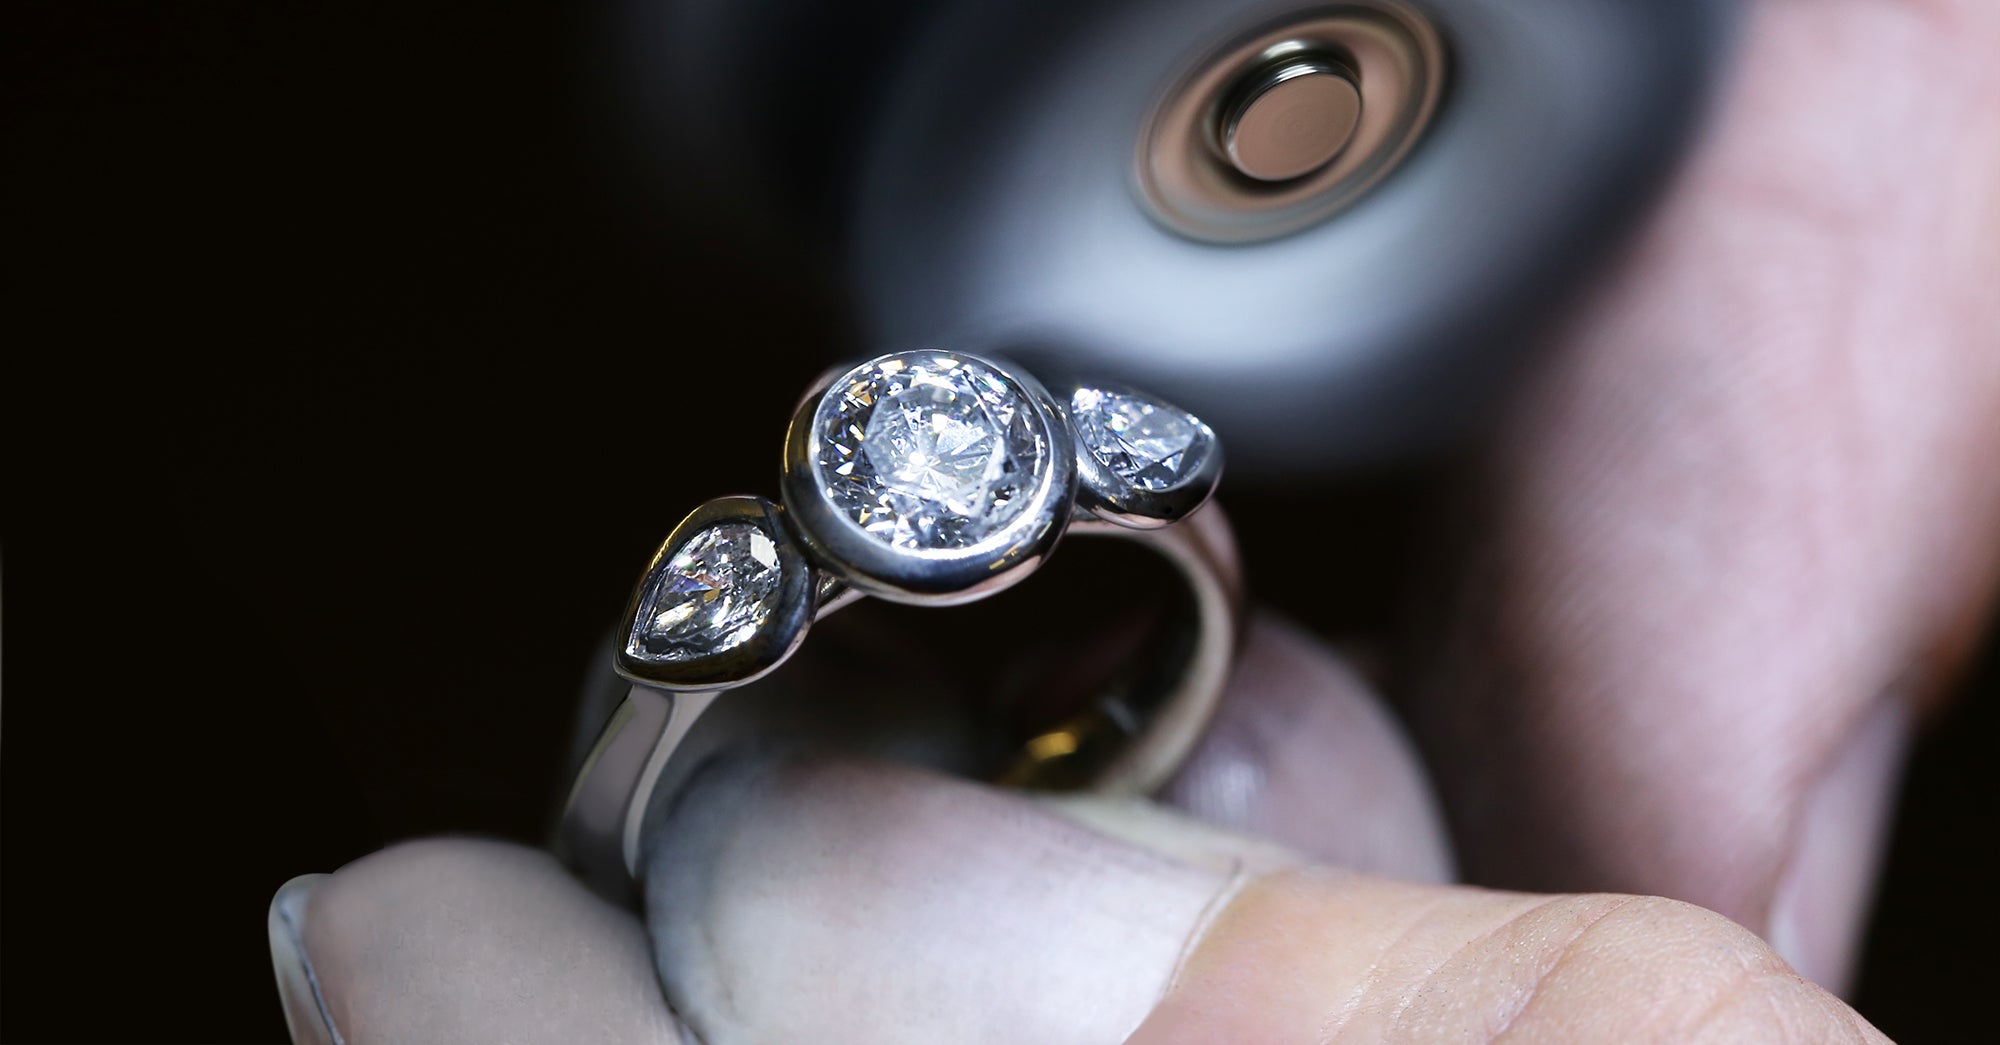 A workshop picture picture showing a diamond Angel ring being polished. The ring cosists of a round brilliant cut diamond and two pear shaped diamonds on either side.